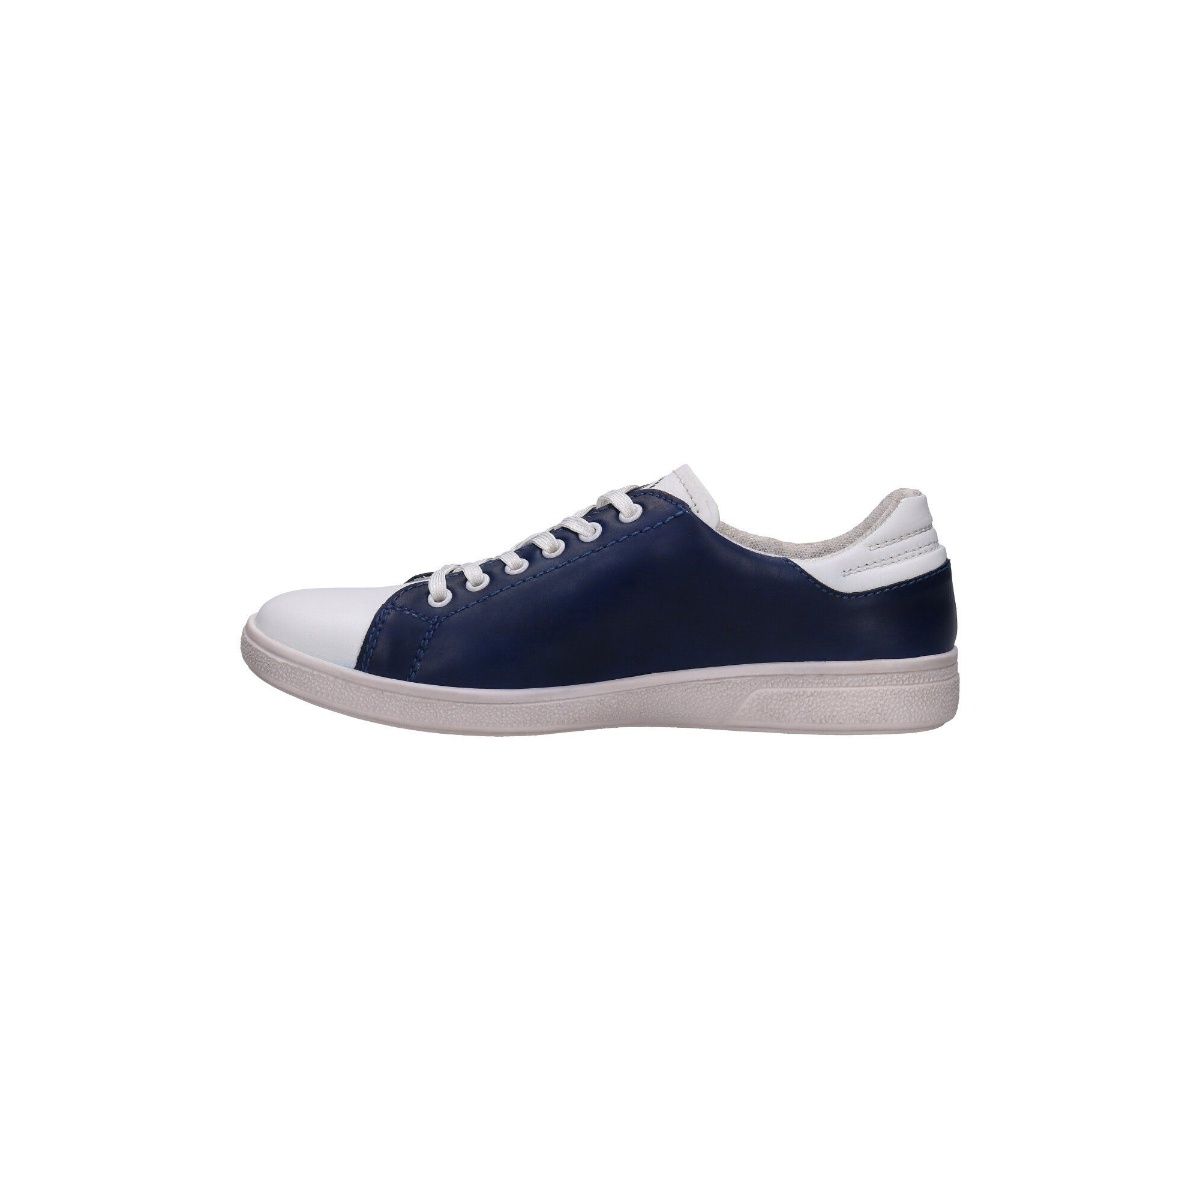 Buy Babyoye Solid Sneakers With Velcro Closure Blue & Pink for Girls  (2-3Years) Online, Shop at FirstCry.com - 12933802